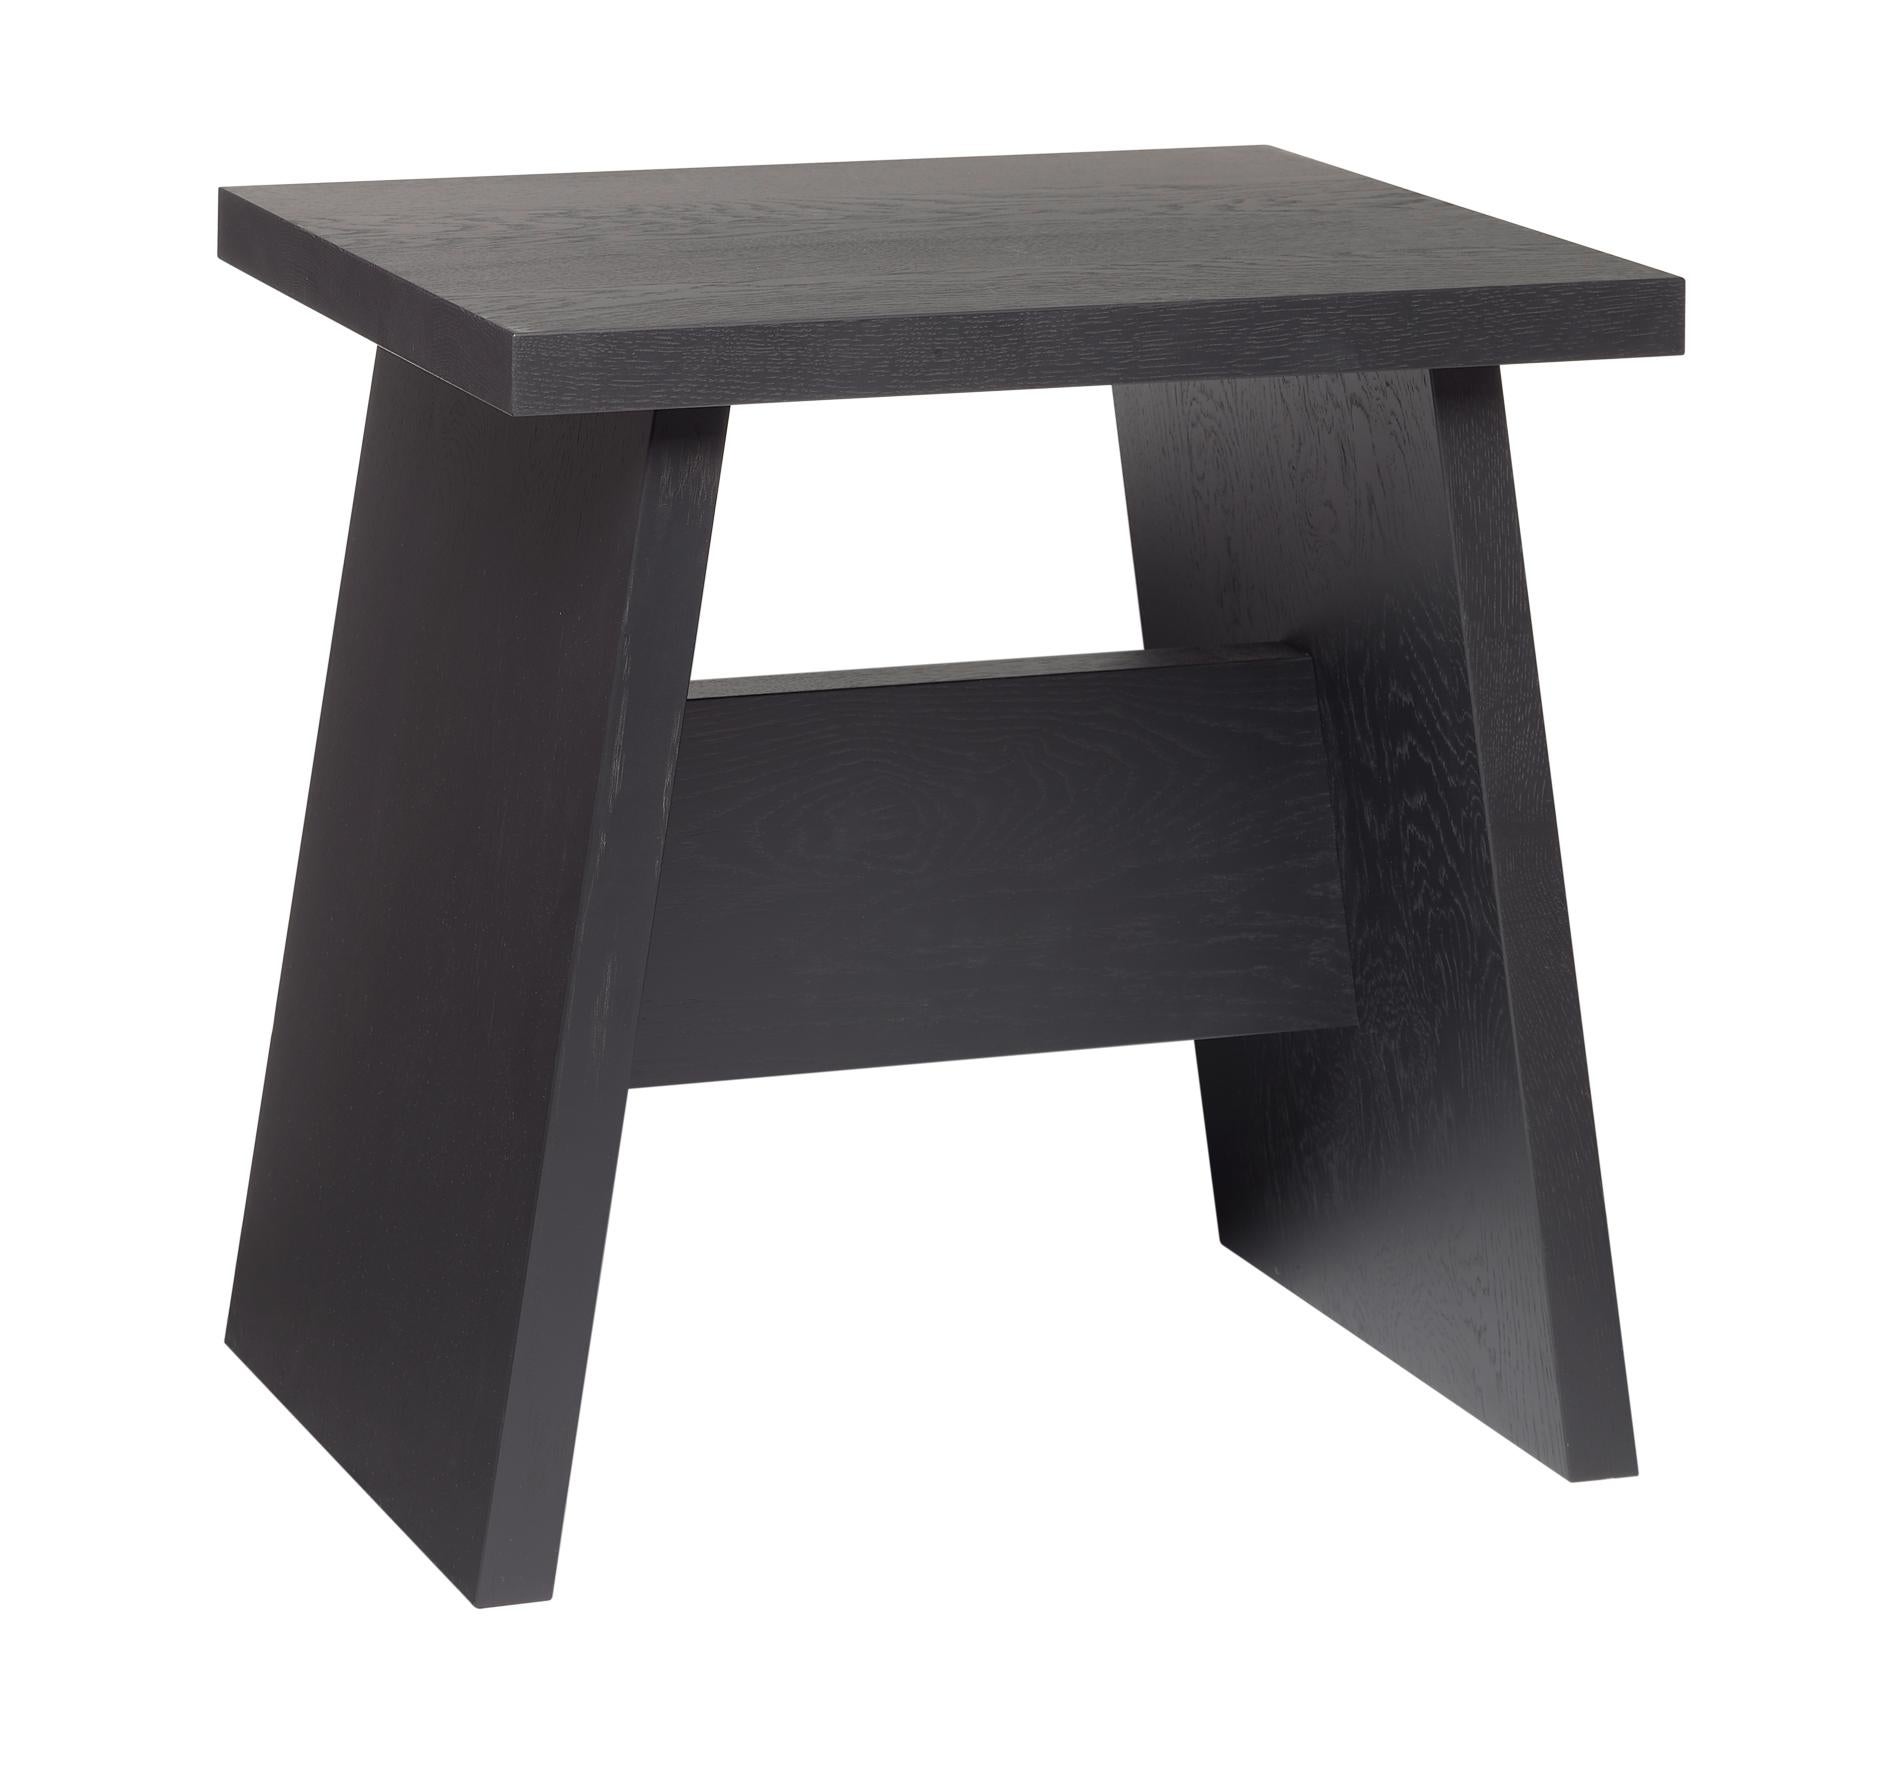 For Sale: Black (Jet Black Stained Lacquer) e15 Langley Wood Side Table by David Chipperfield